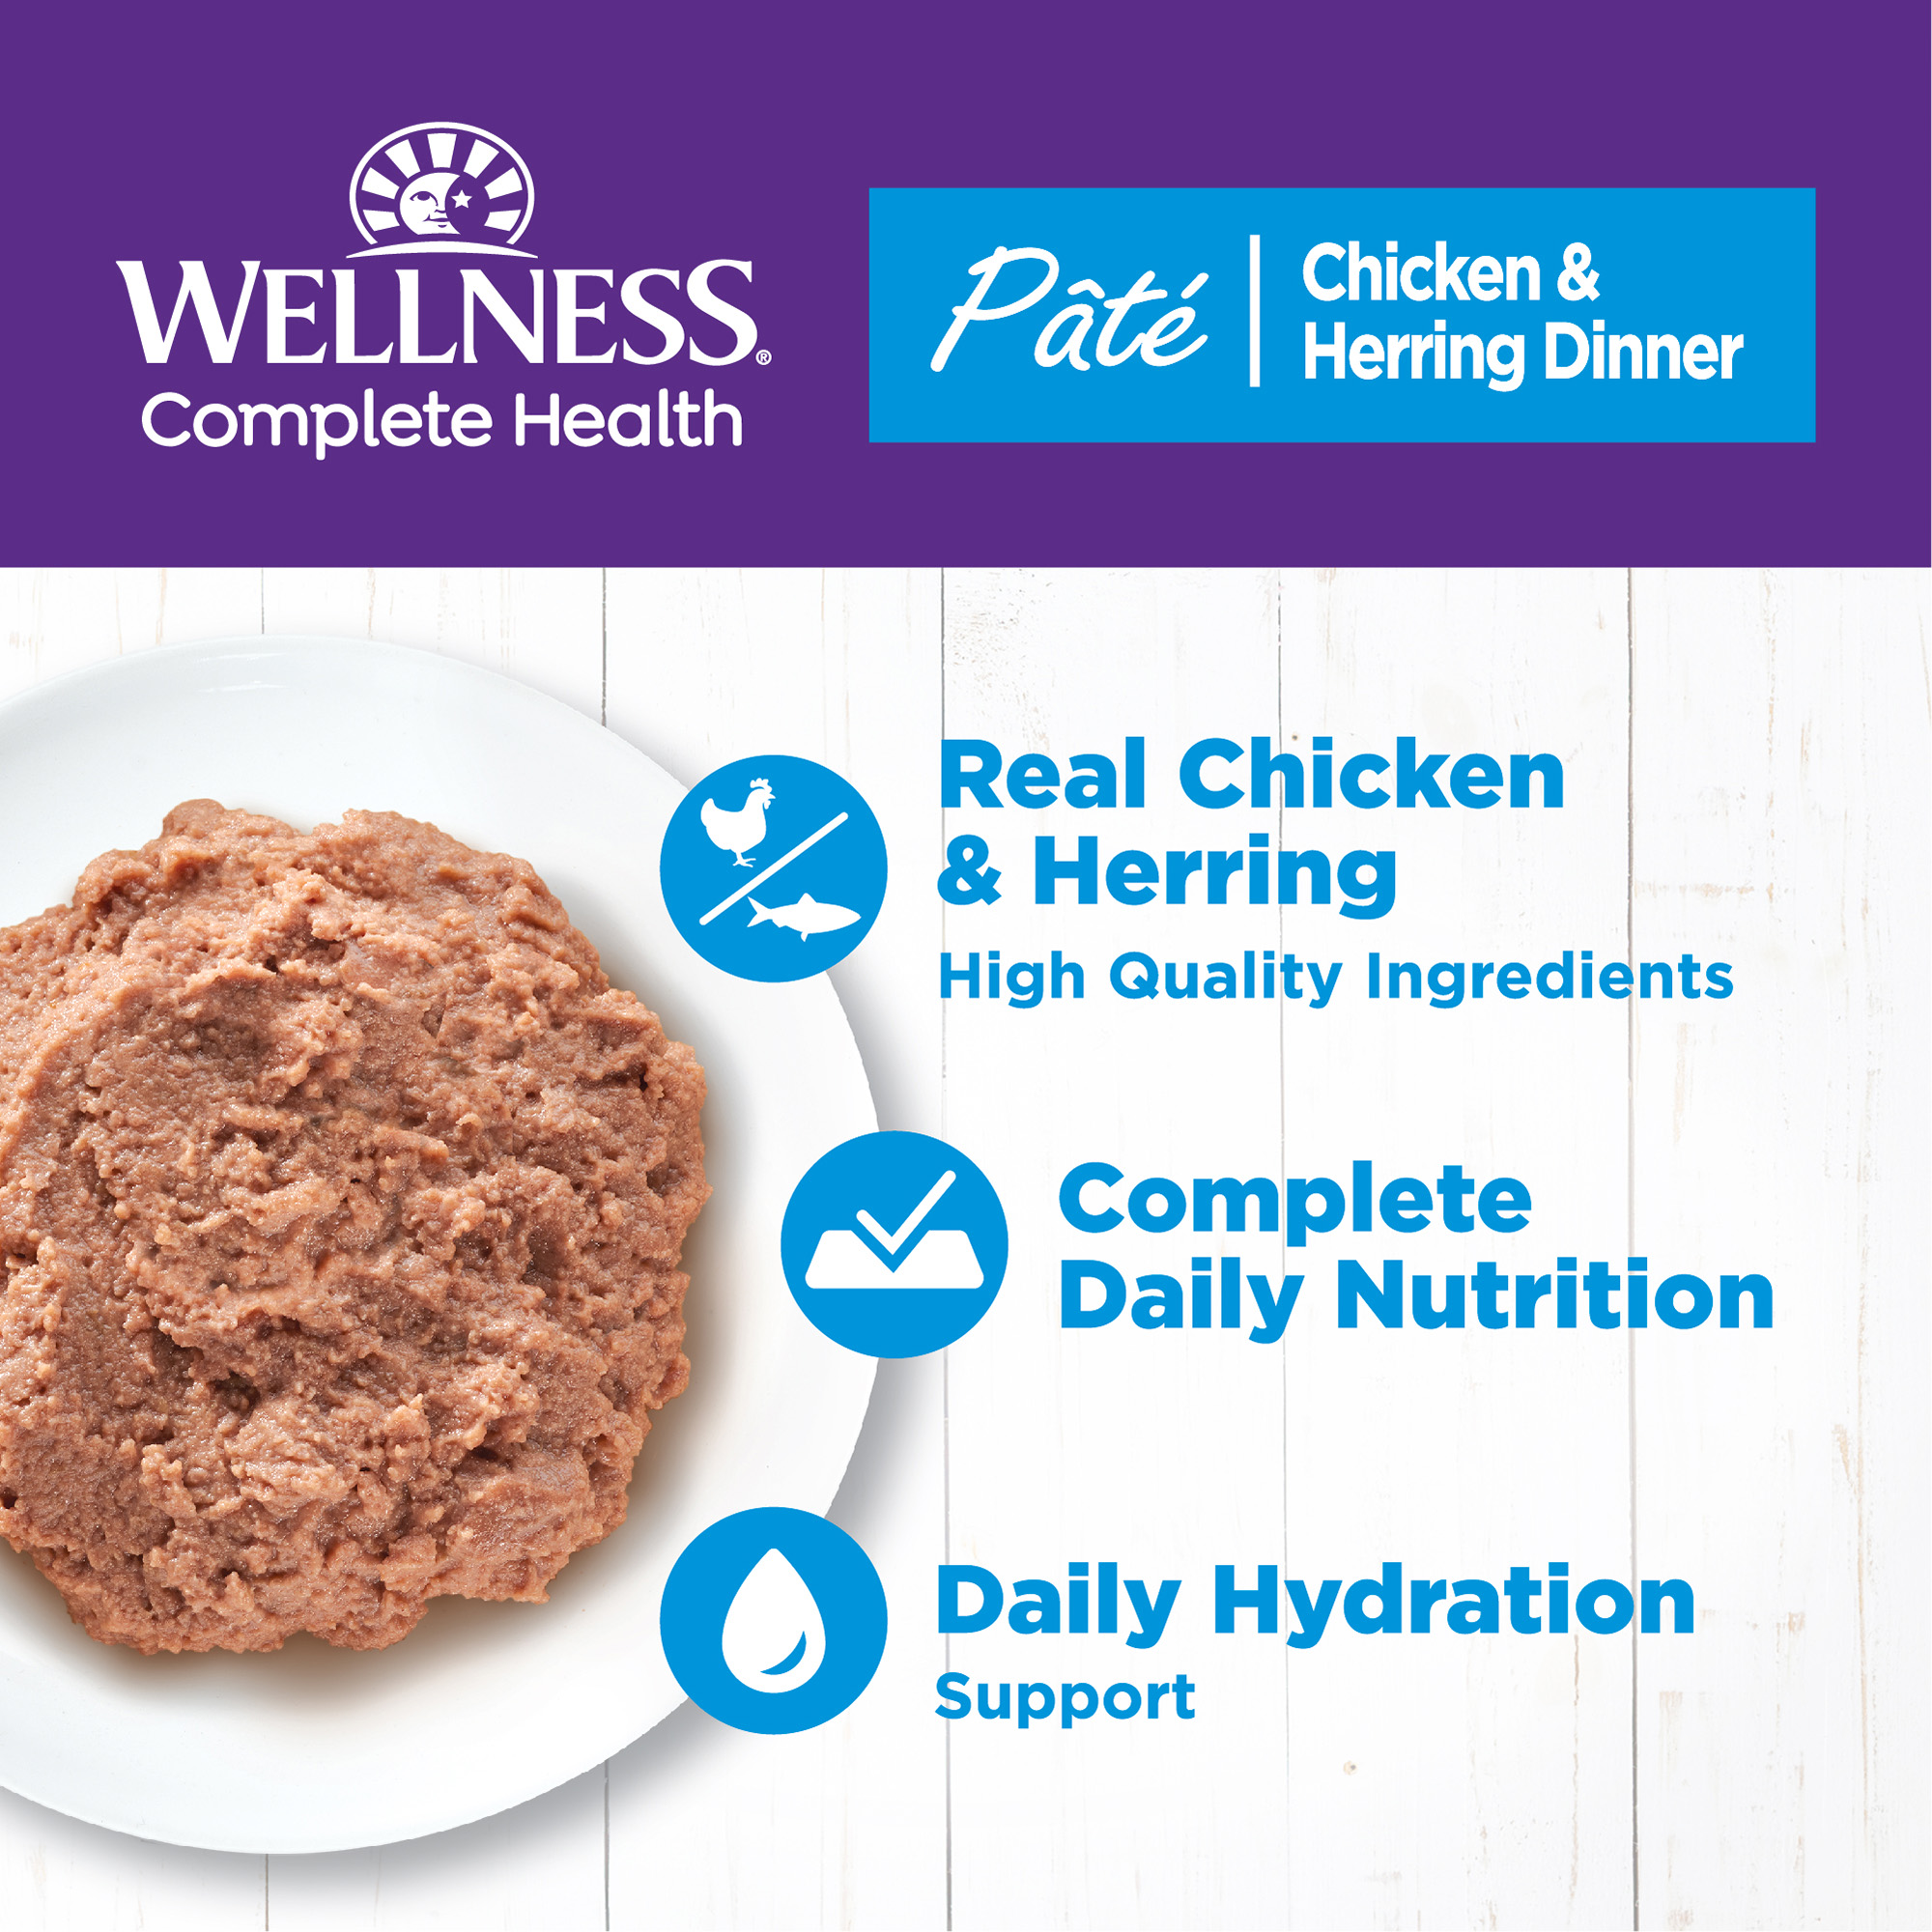 Wellness Complete Health Grain Free Canned Cat Food, Chicken & Herring Dinner Pate, 12.5 Ounces (Pack of 12) - image 2 of 9